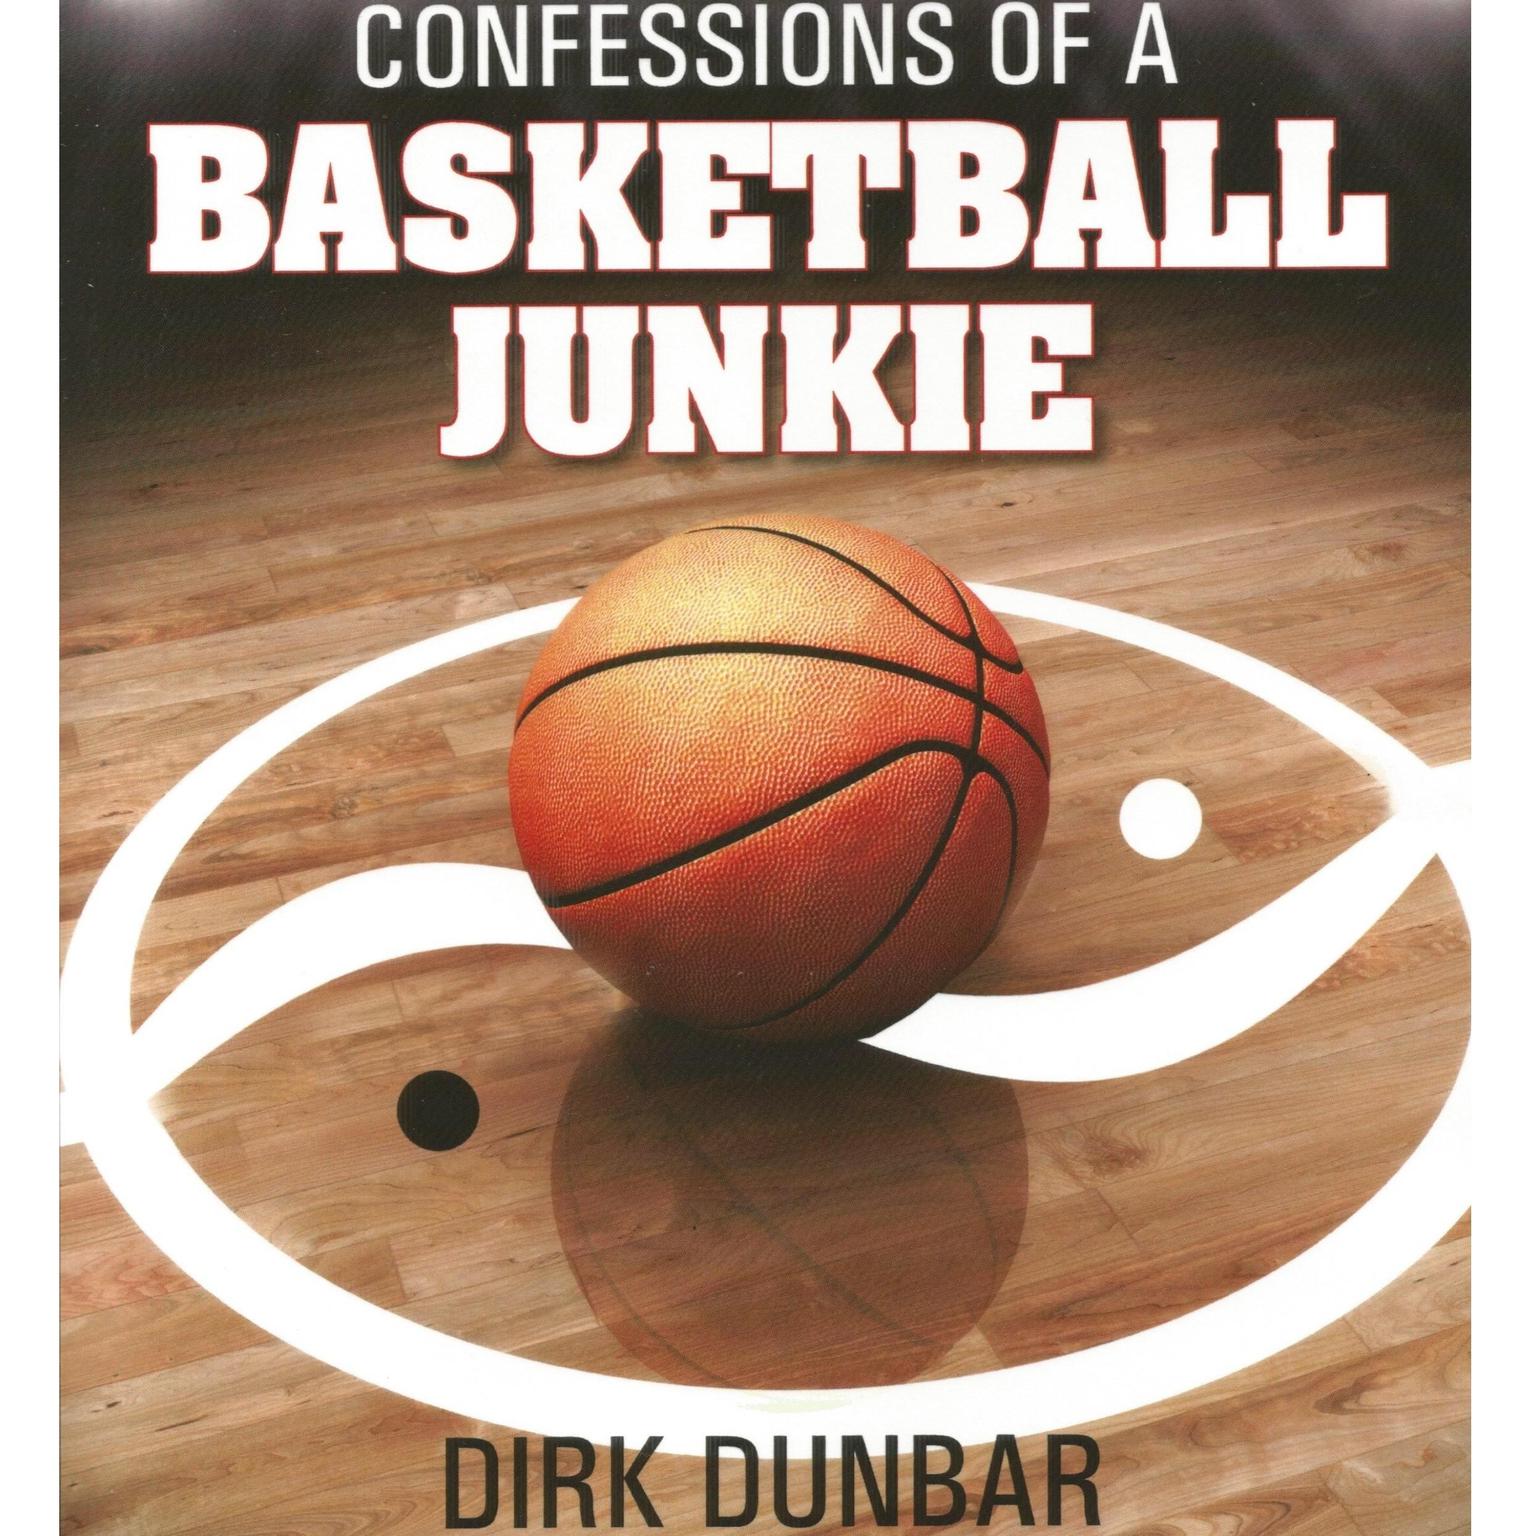 Confessions of a Basketball Junkie Audiobook, by Dirk Dunbar